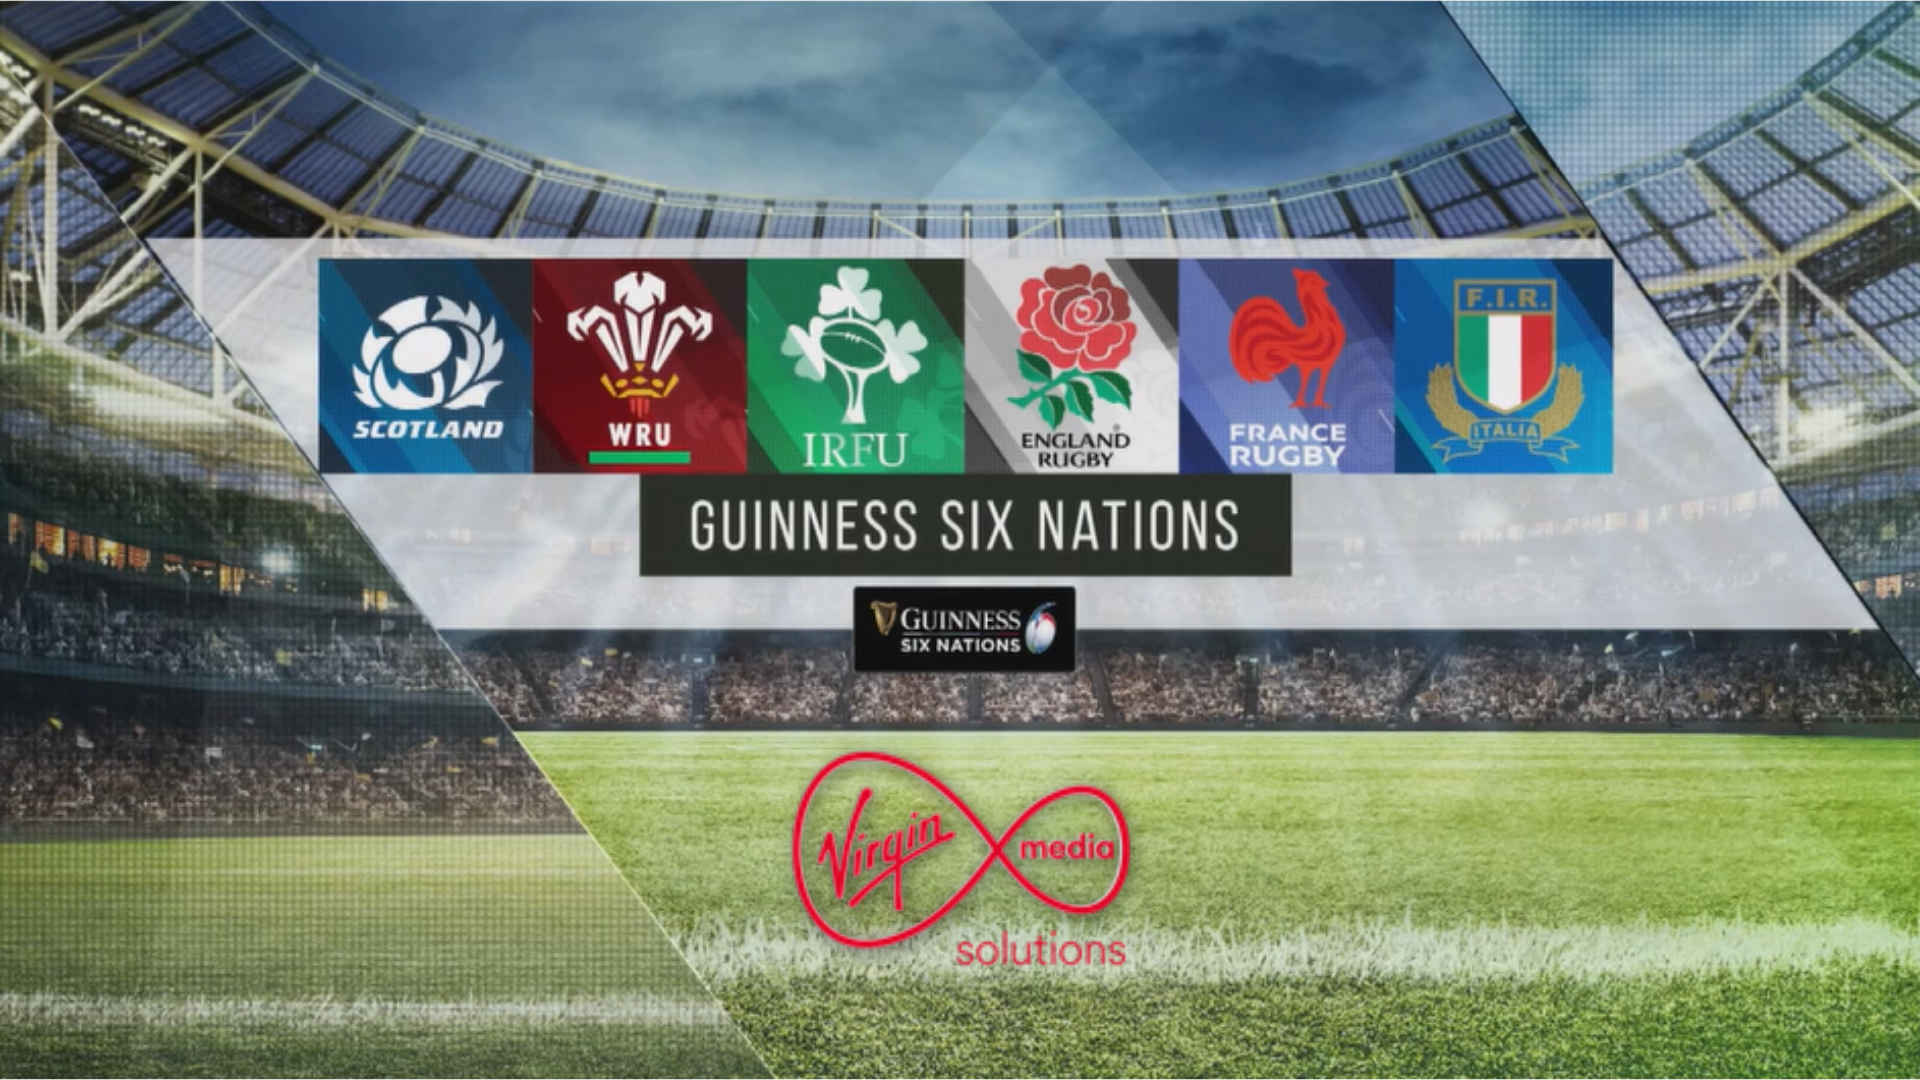 Virgin Media Solutions Exclusive: Guinness Six Nations Preview